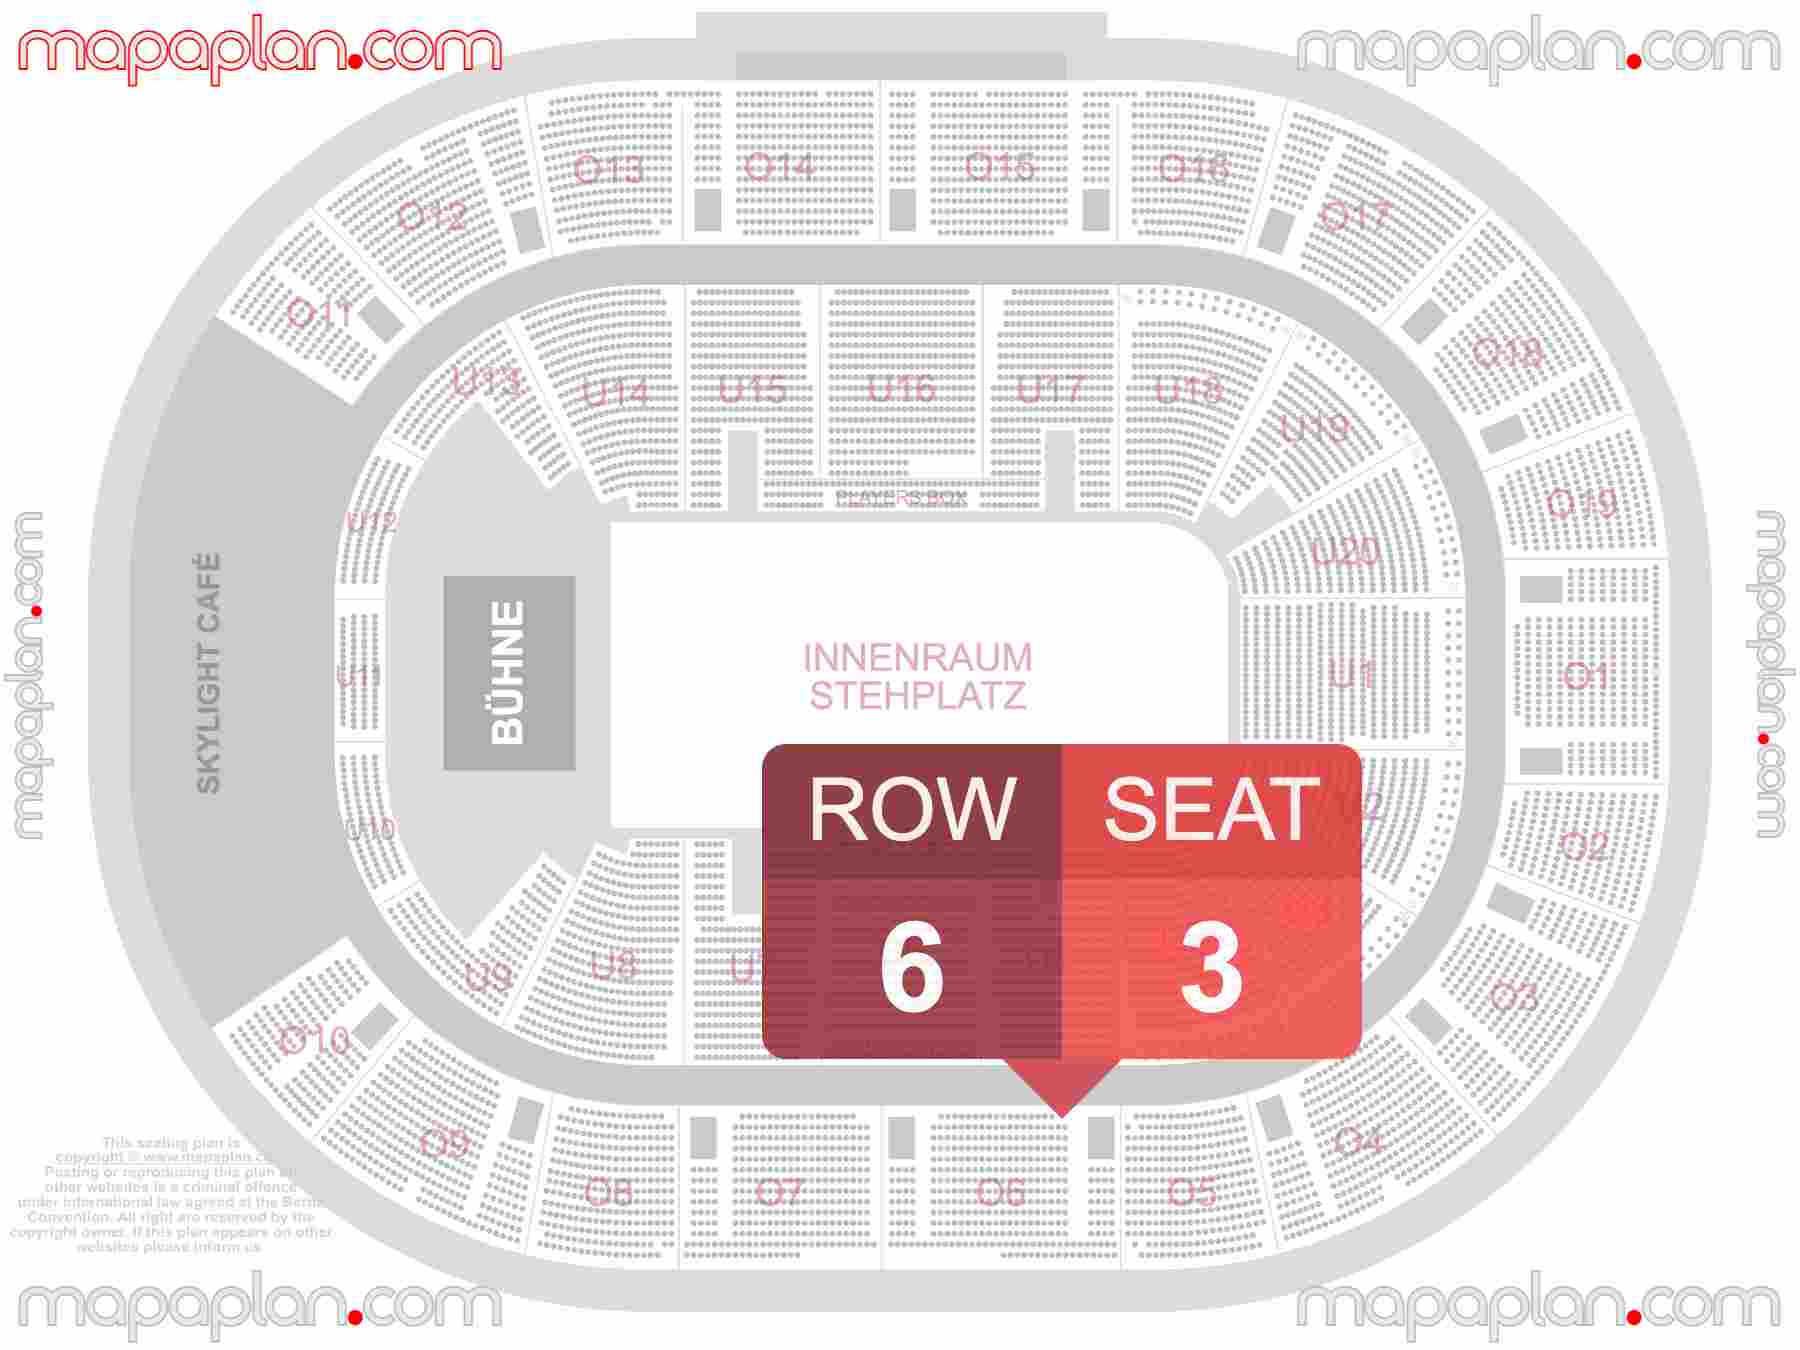 Hamburg Barclays Arena seating plan Concert with floor general admission standing room only Konzert mit nur Innenraum Stehplätze interactive seating checker map map showing seat numbers per row - Ticket prices sections review diagram